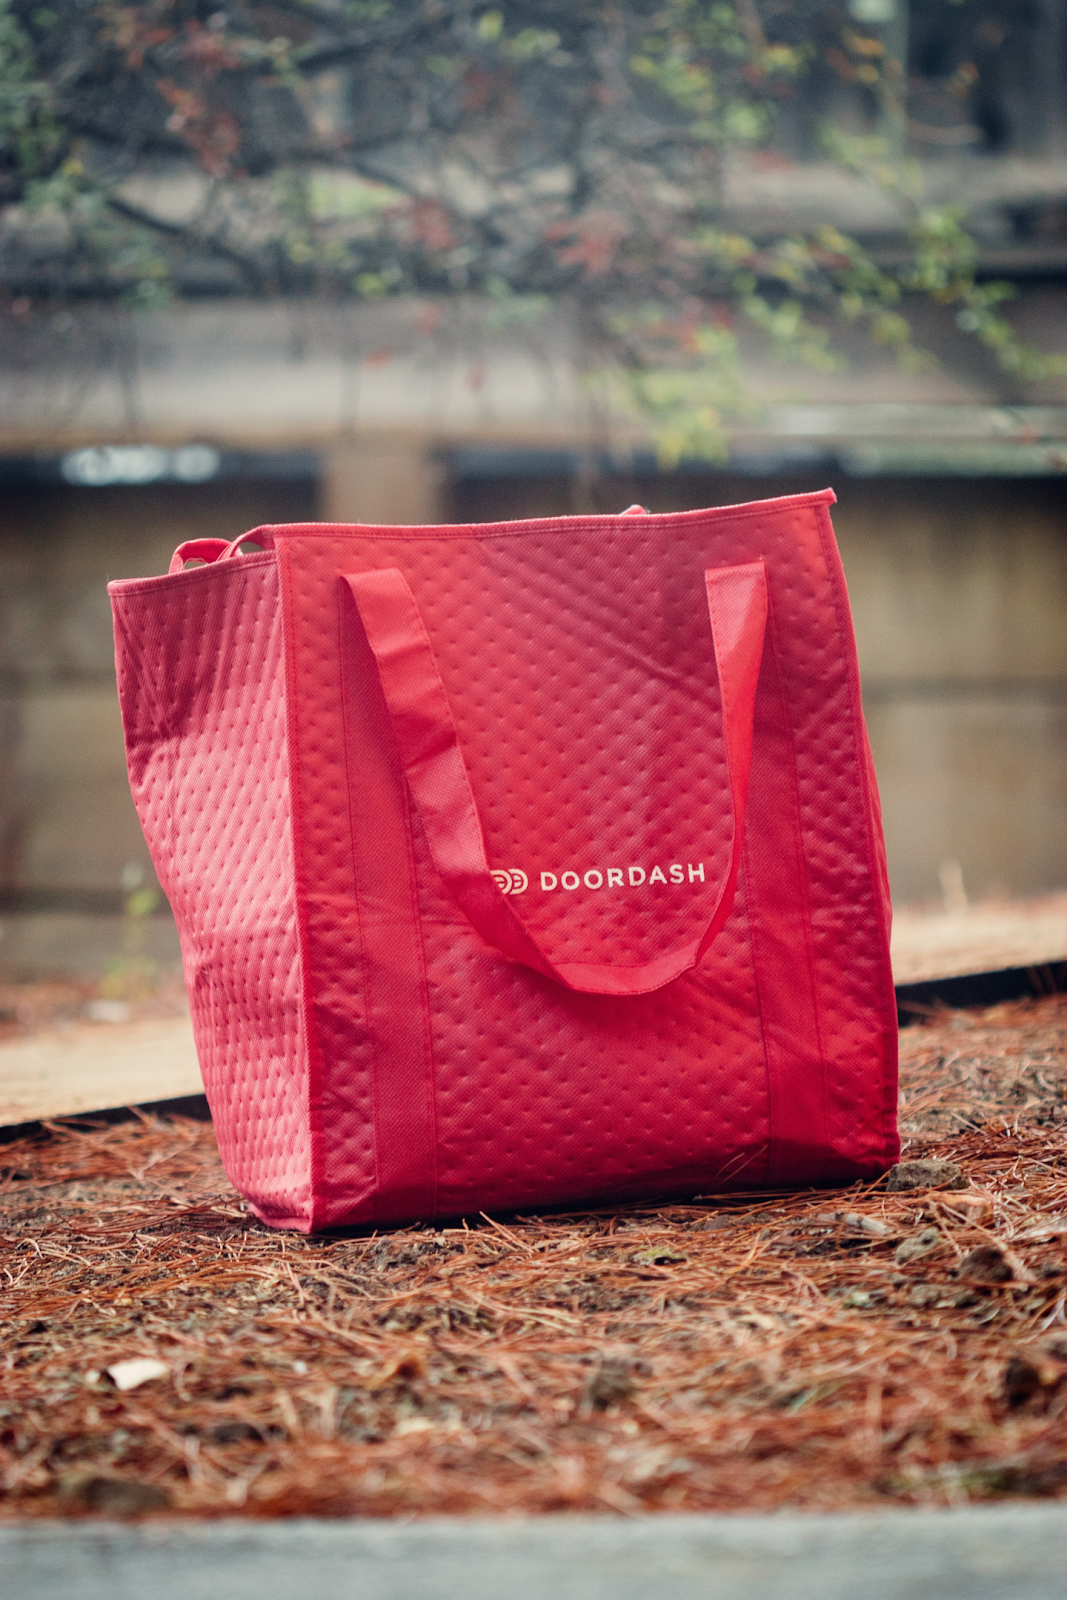 doordash delivery bag on the ground, doordash accident theme bodily injury liability